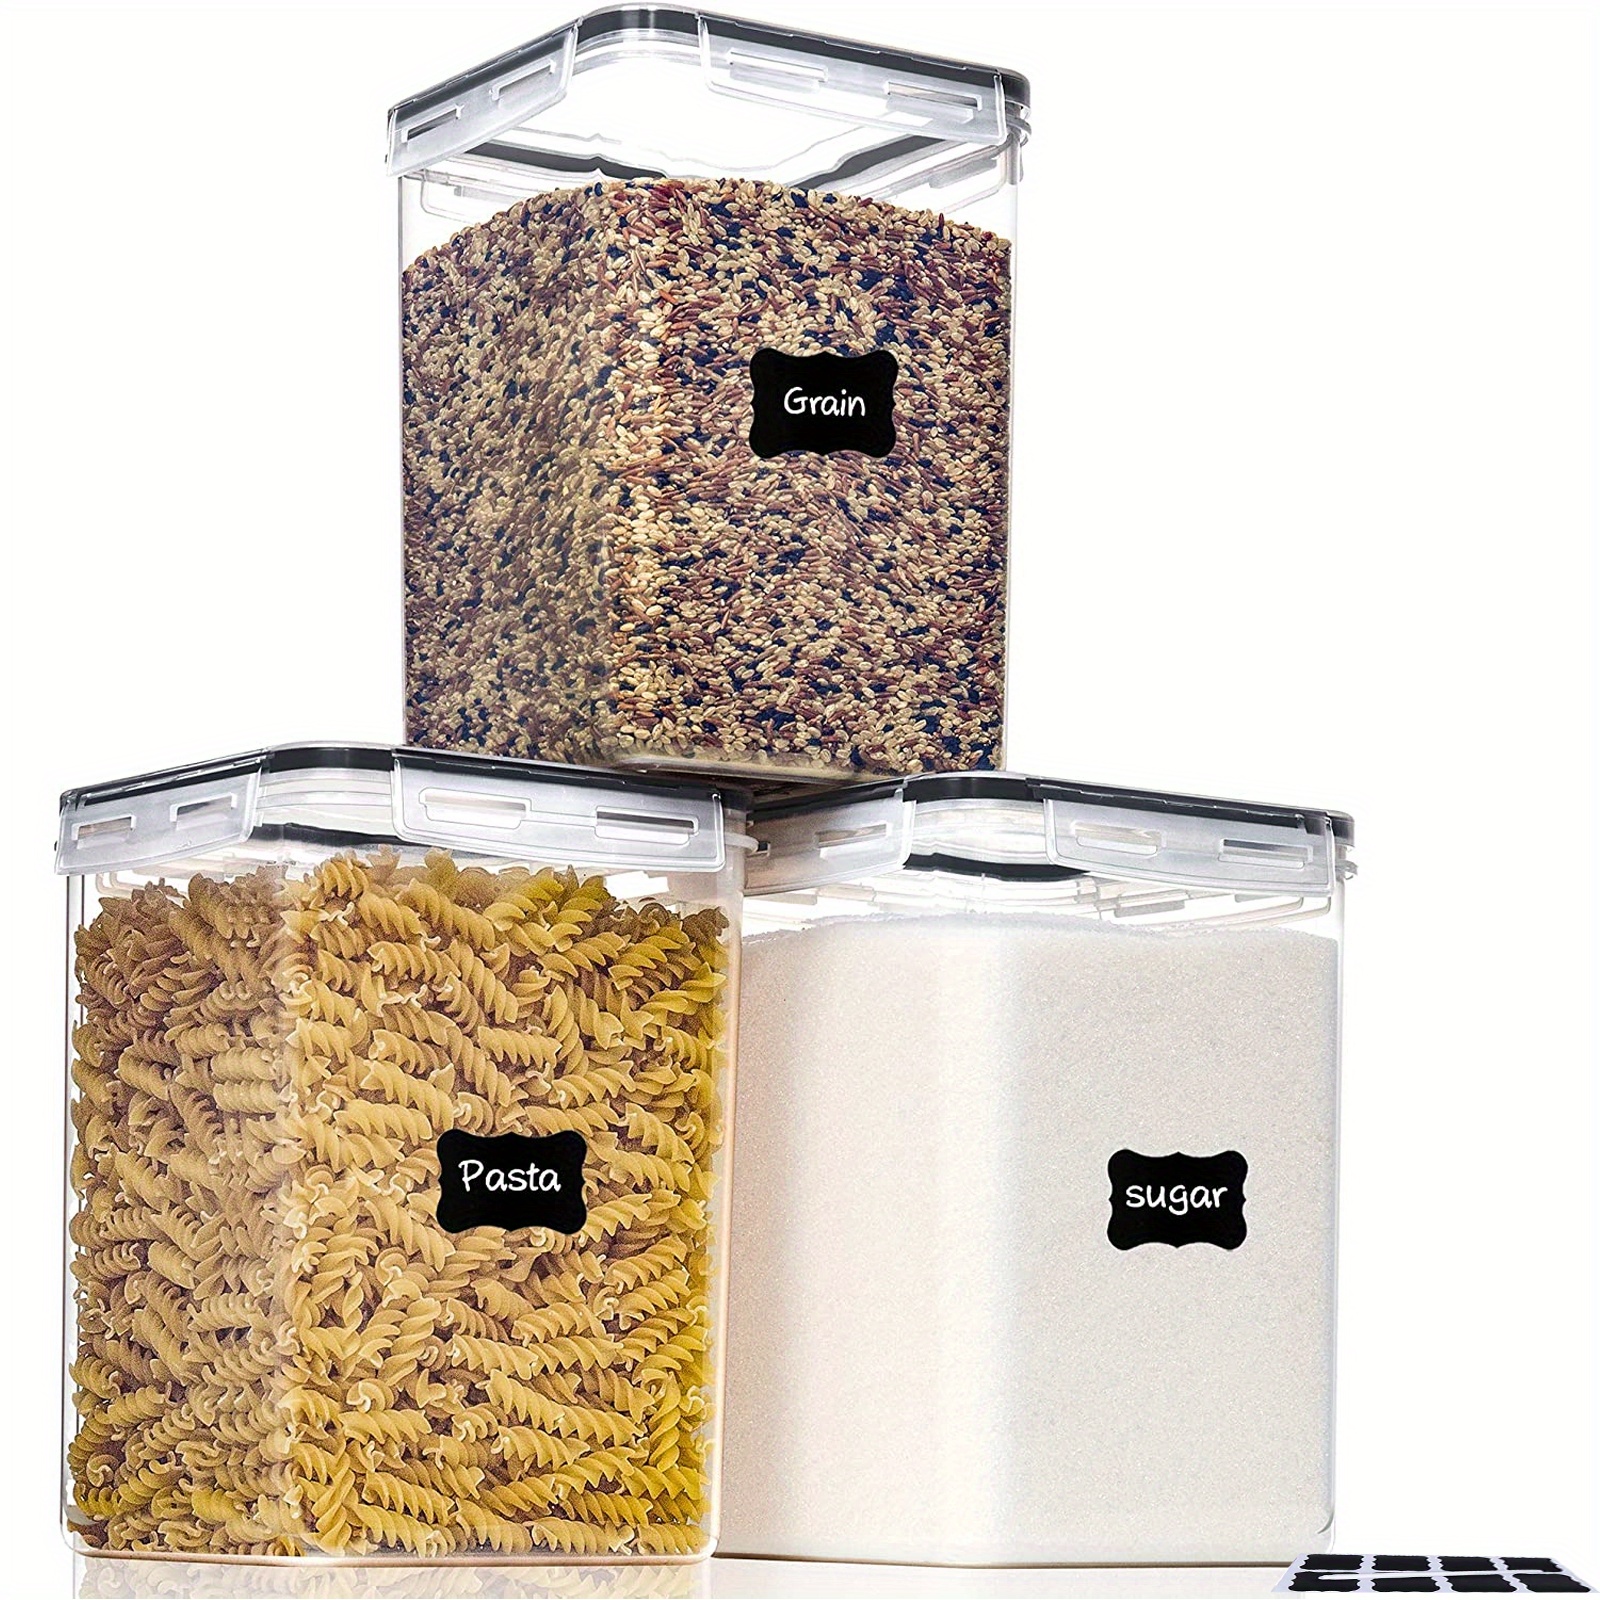 3Pcs Large Airtight Food Storage Containers With Lids 5.2L/176Oz, BPA Free Plastic Kitchen Pantry Canisters For Flour,Sugar,Dry Food - With Lables